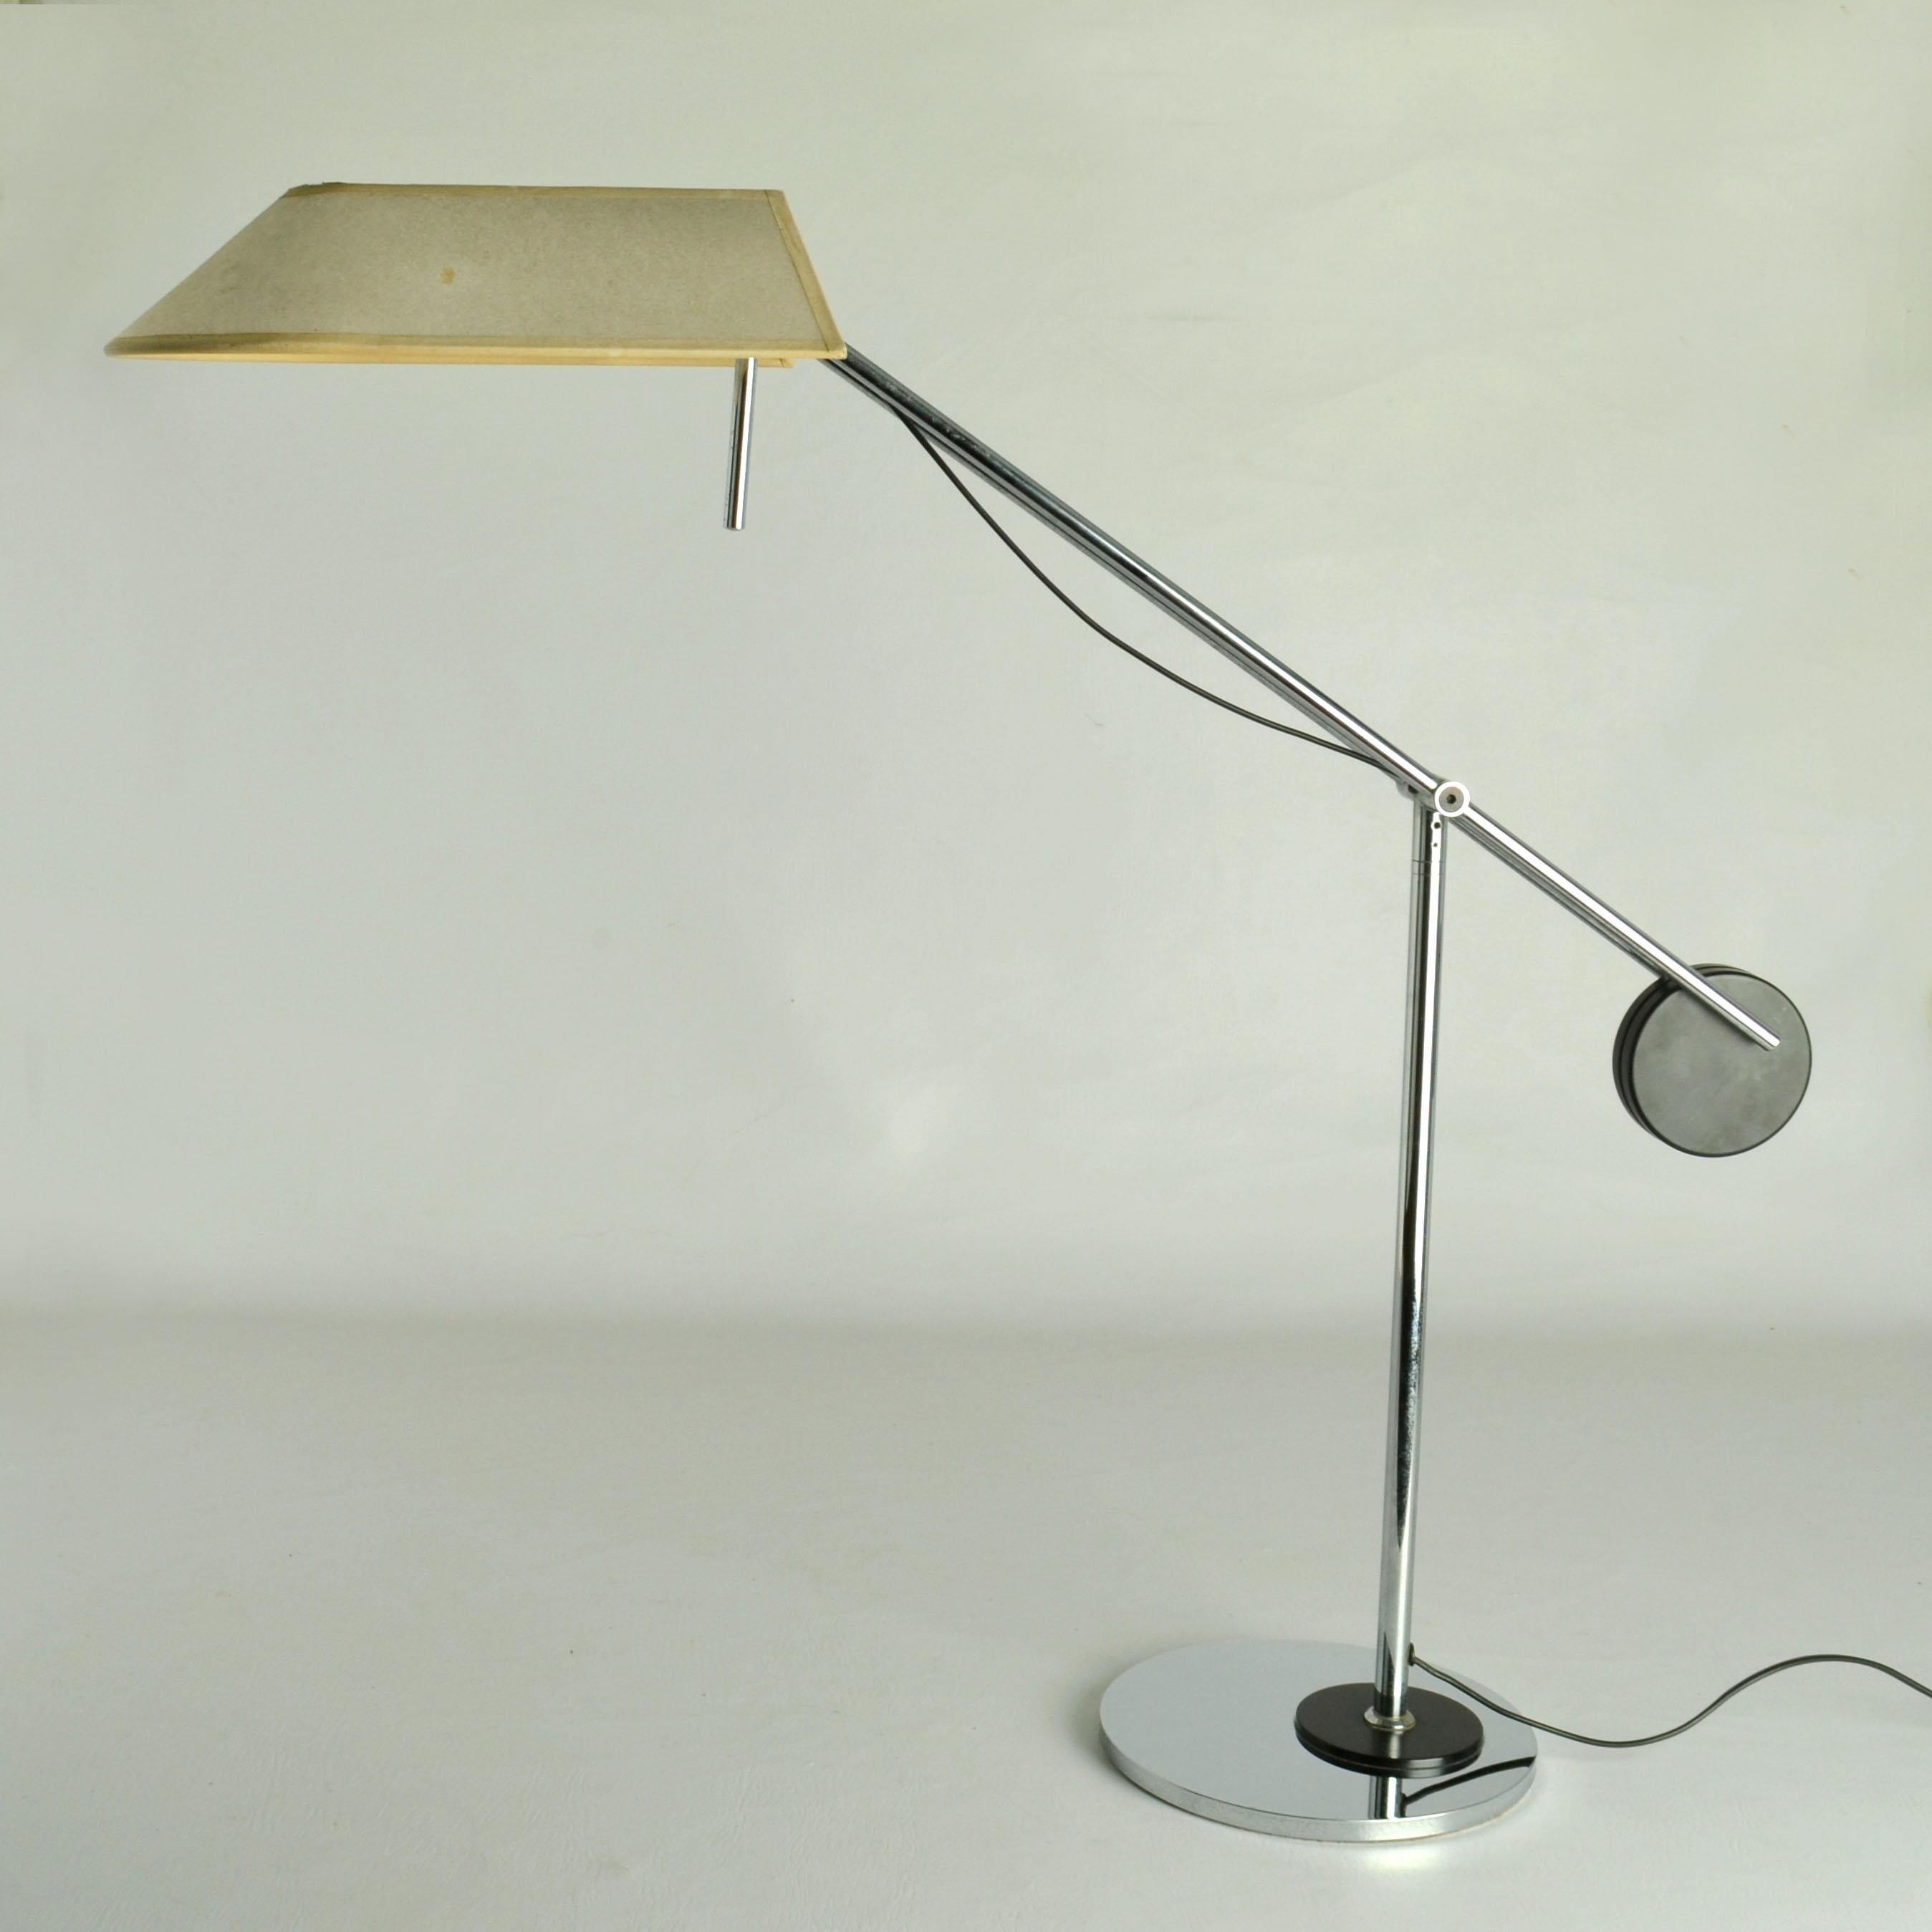 The counter balance architect's table Lamp is a rare find attributed to Laszlo Nigrini for Swiss Lamps International, 1970's.
The flexible structure allow the light source and the parchment shade to be articulated at various positions by the black